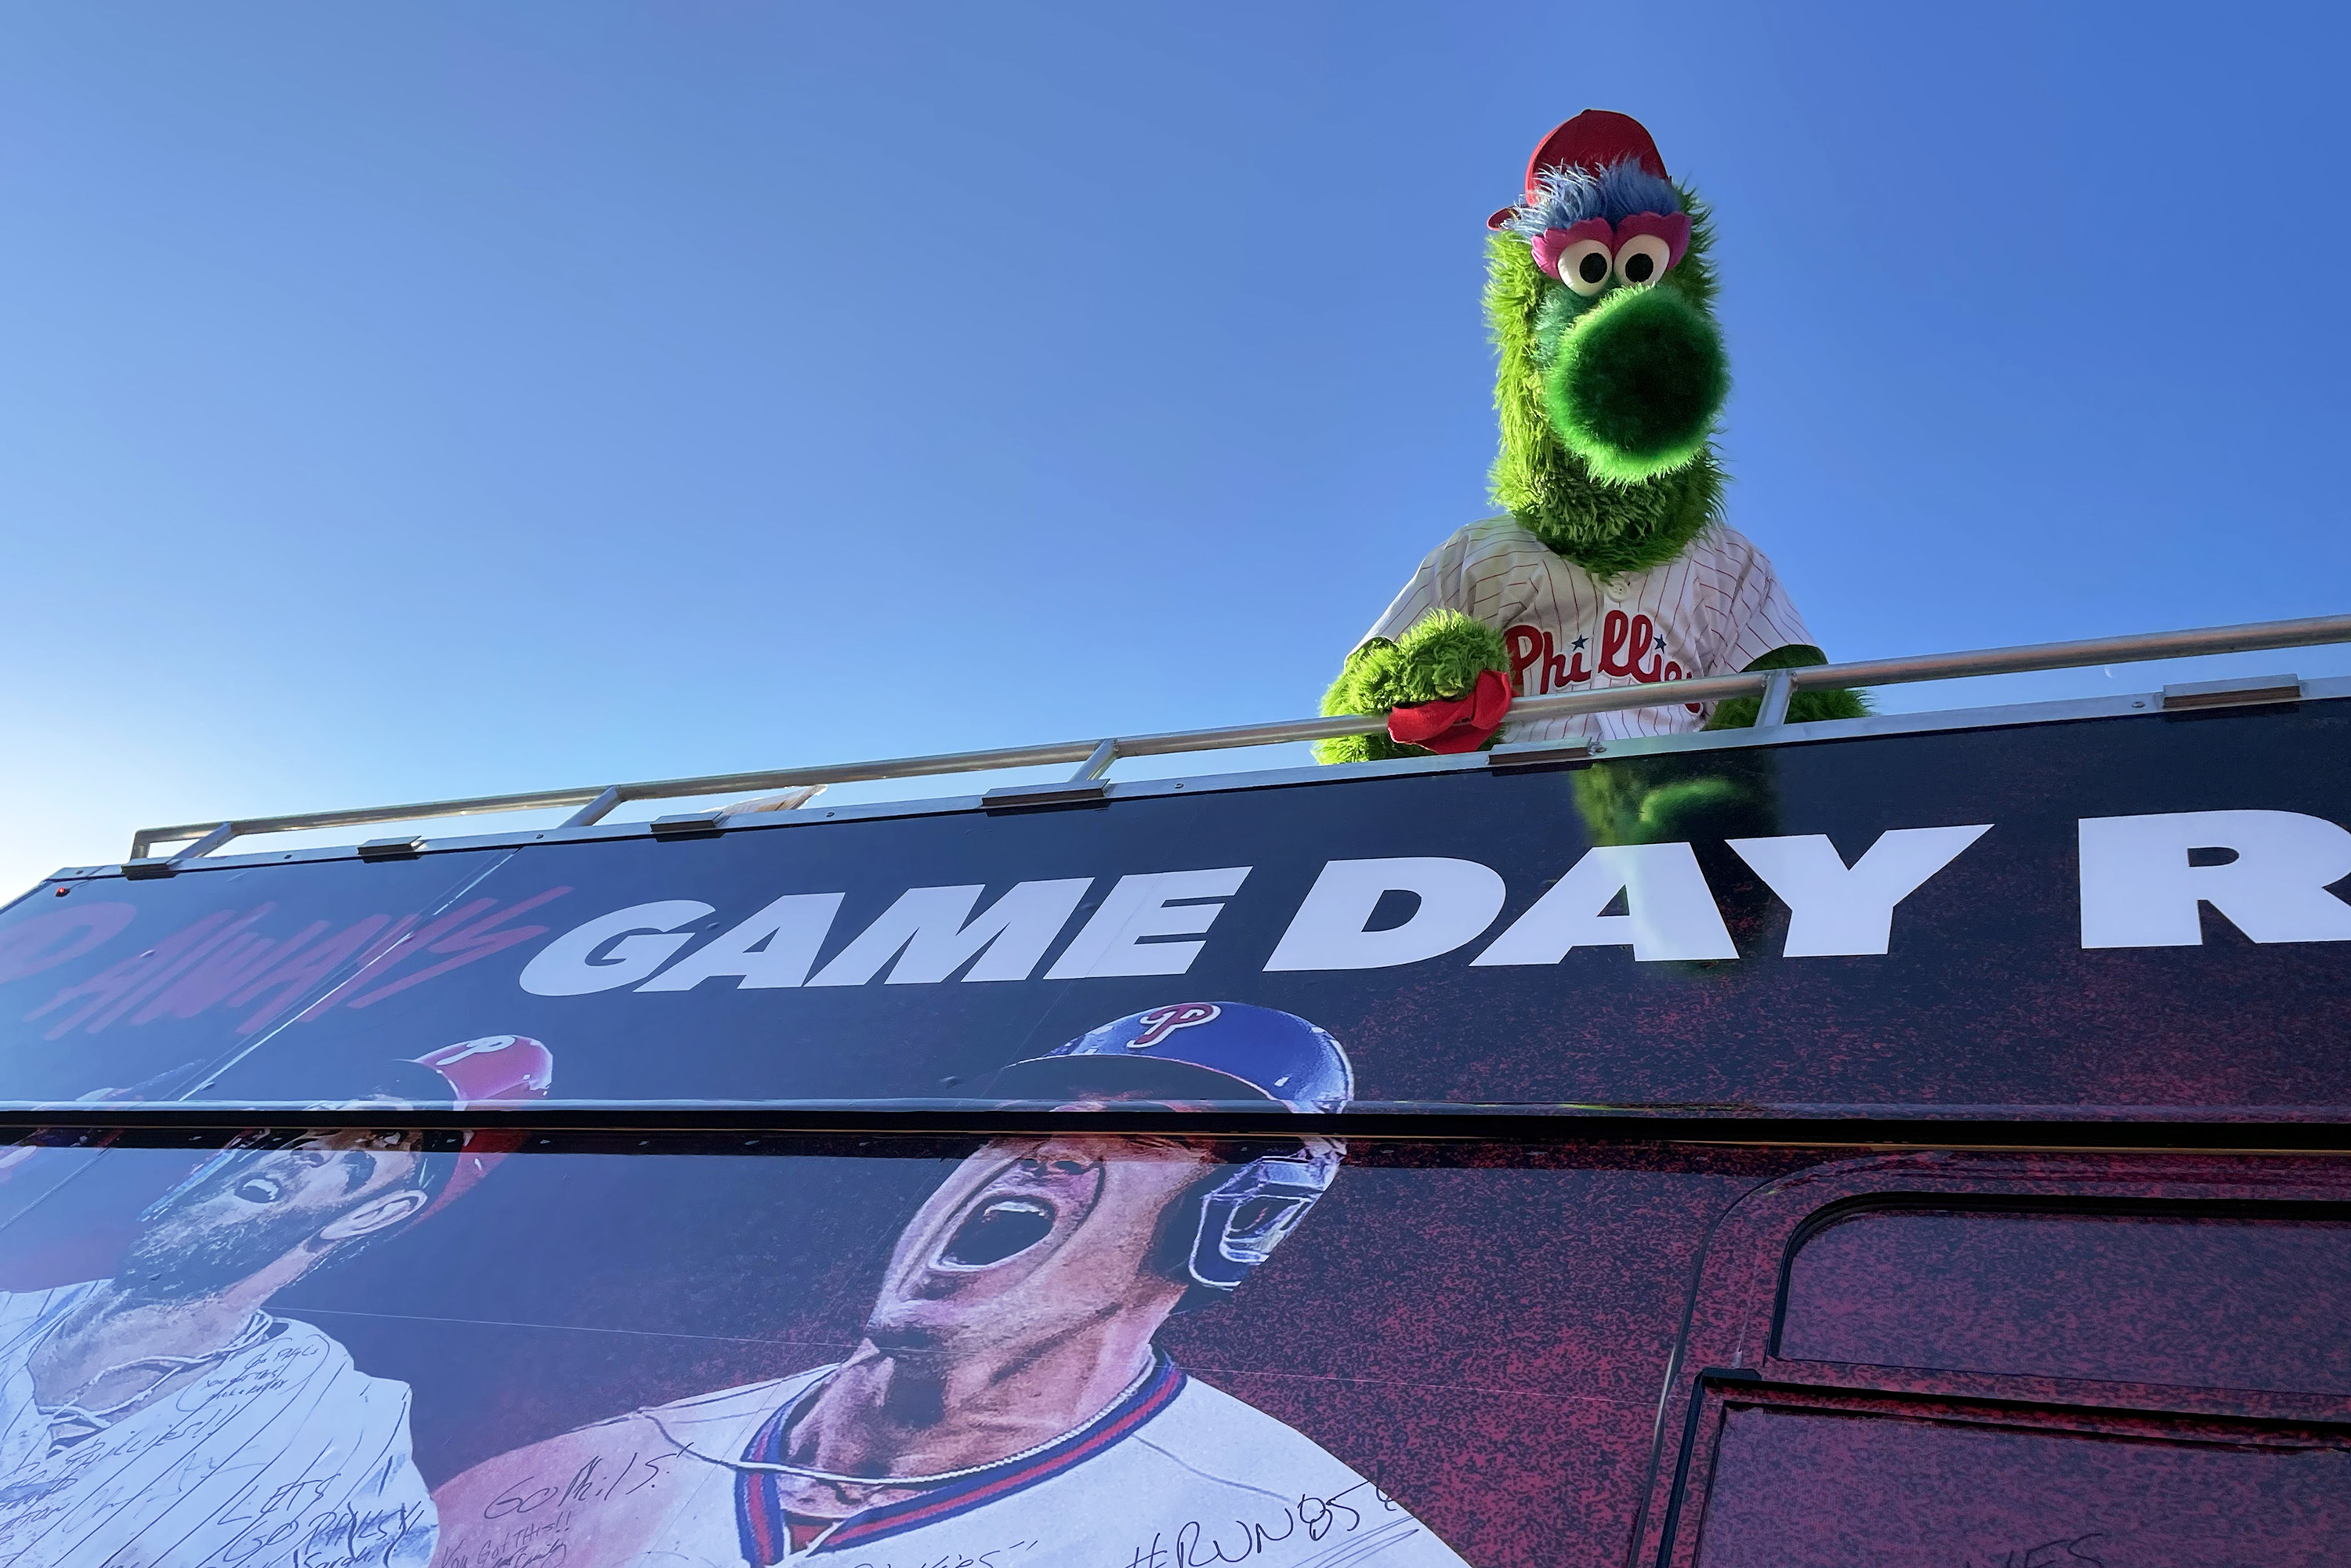 Pictures of the Phanatic rallying South Jersey elementary school students